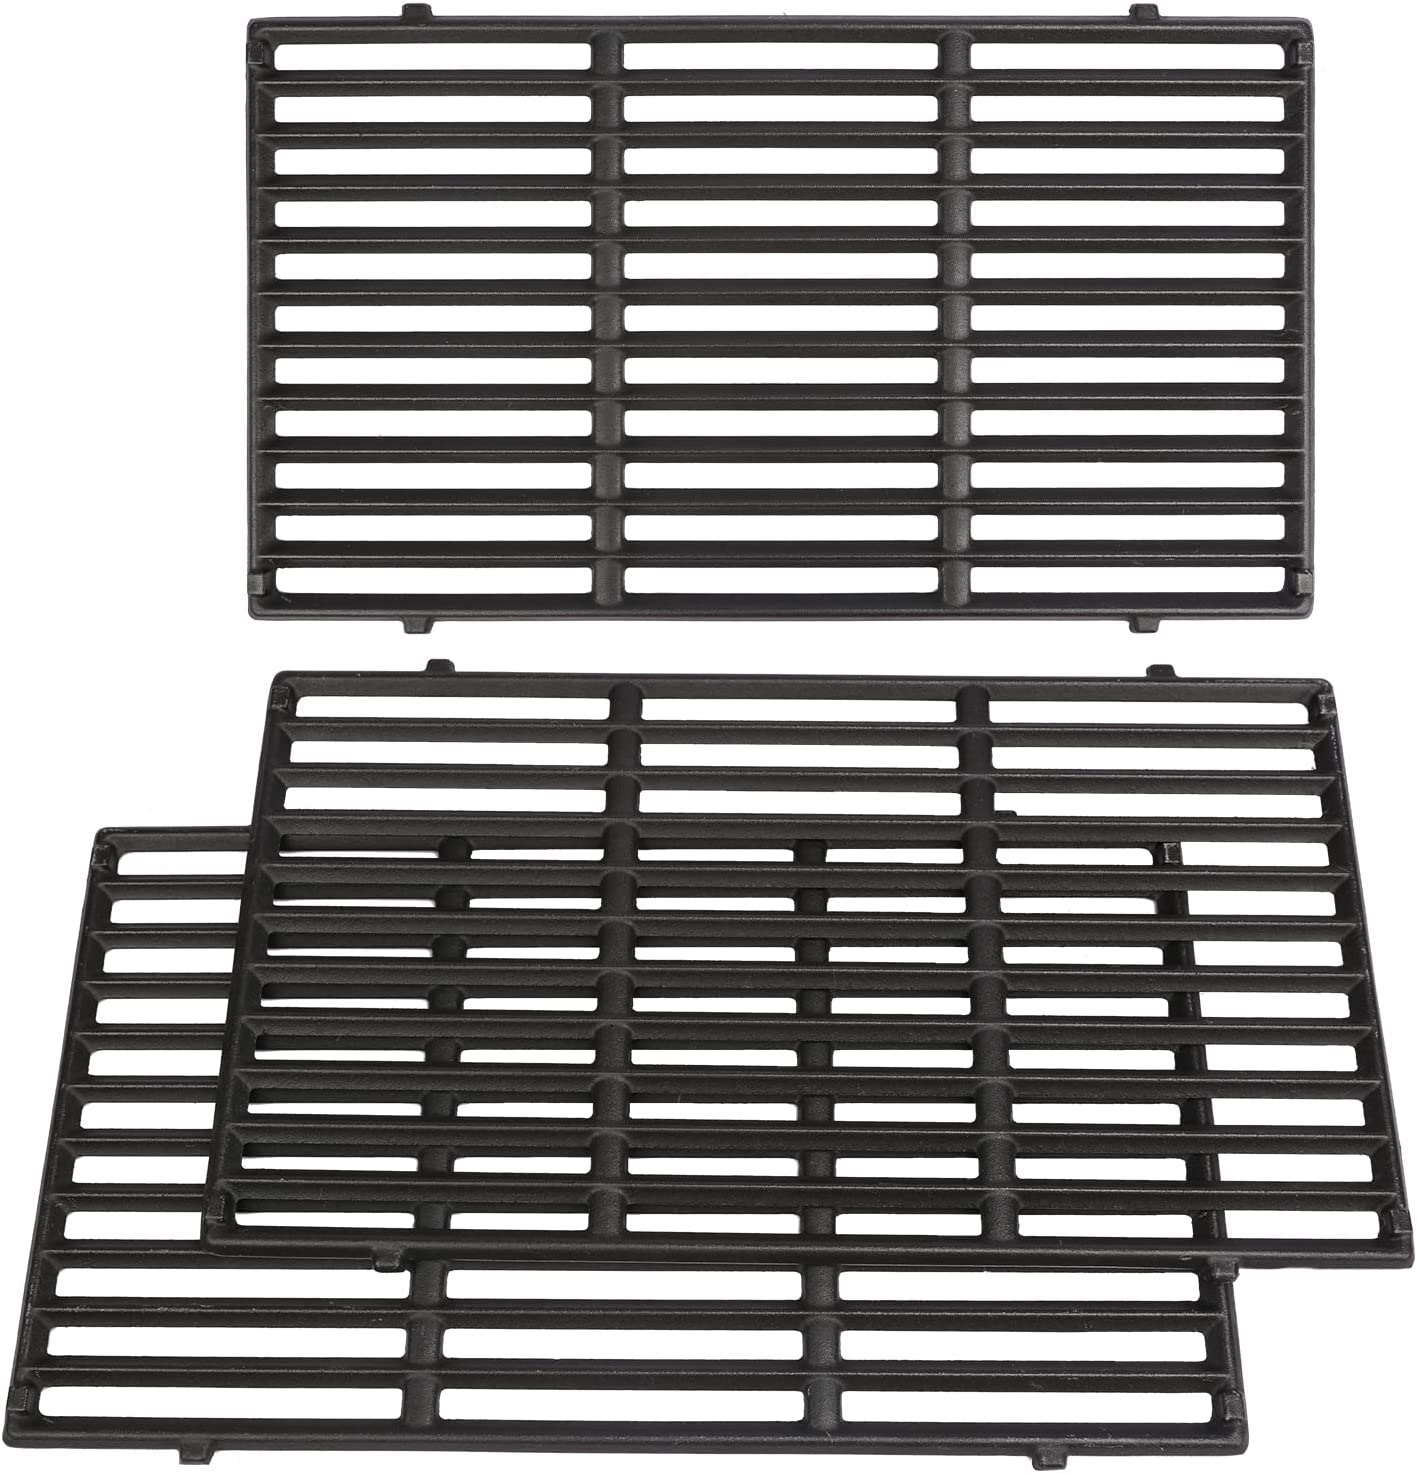 Grisun 18.7" Cooking Grates for Weber Genesis II 400 and Genesis II LX 400 Series Gas Grills, Cast Iron Replacement Parts for Weber 66089 66097, Set of 3 - image 1 of 7